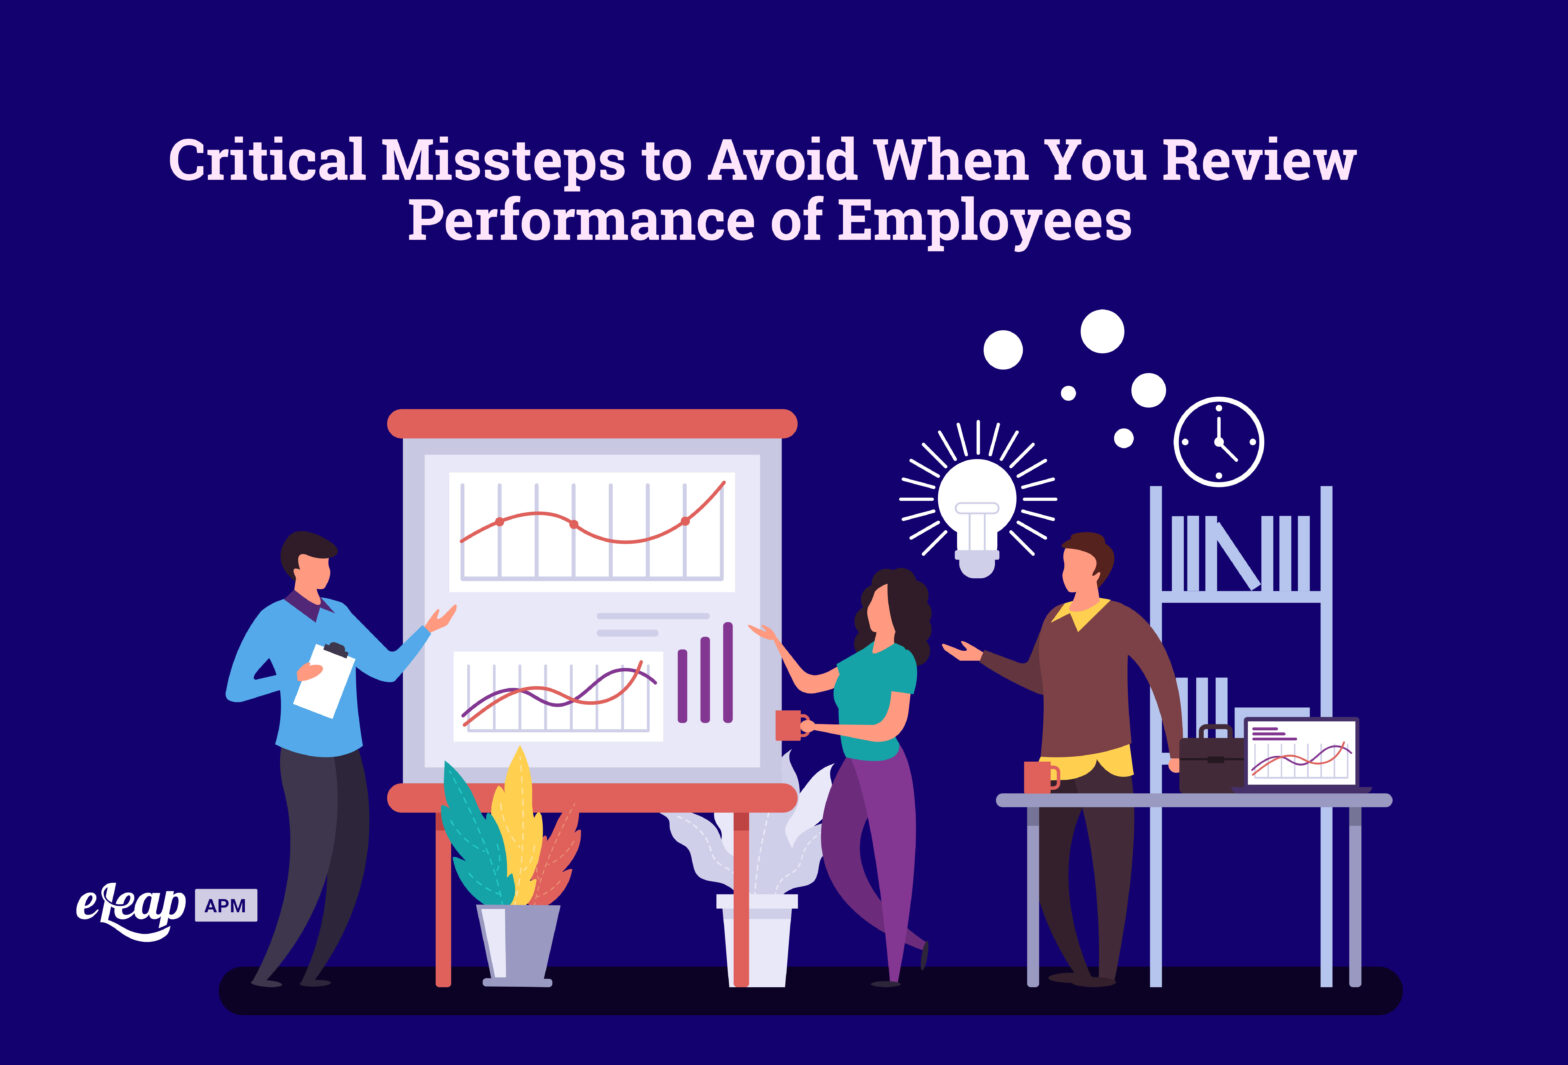 Critical Missteps to Avoid When You Review Performance of Employees